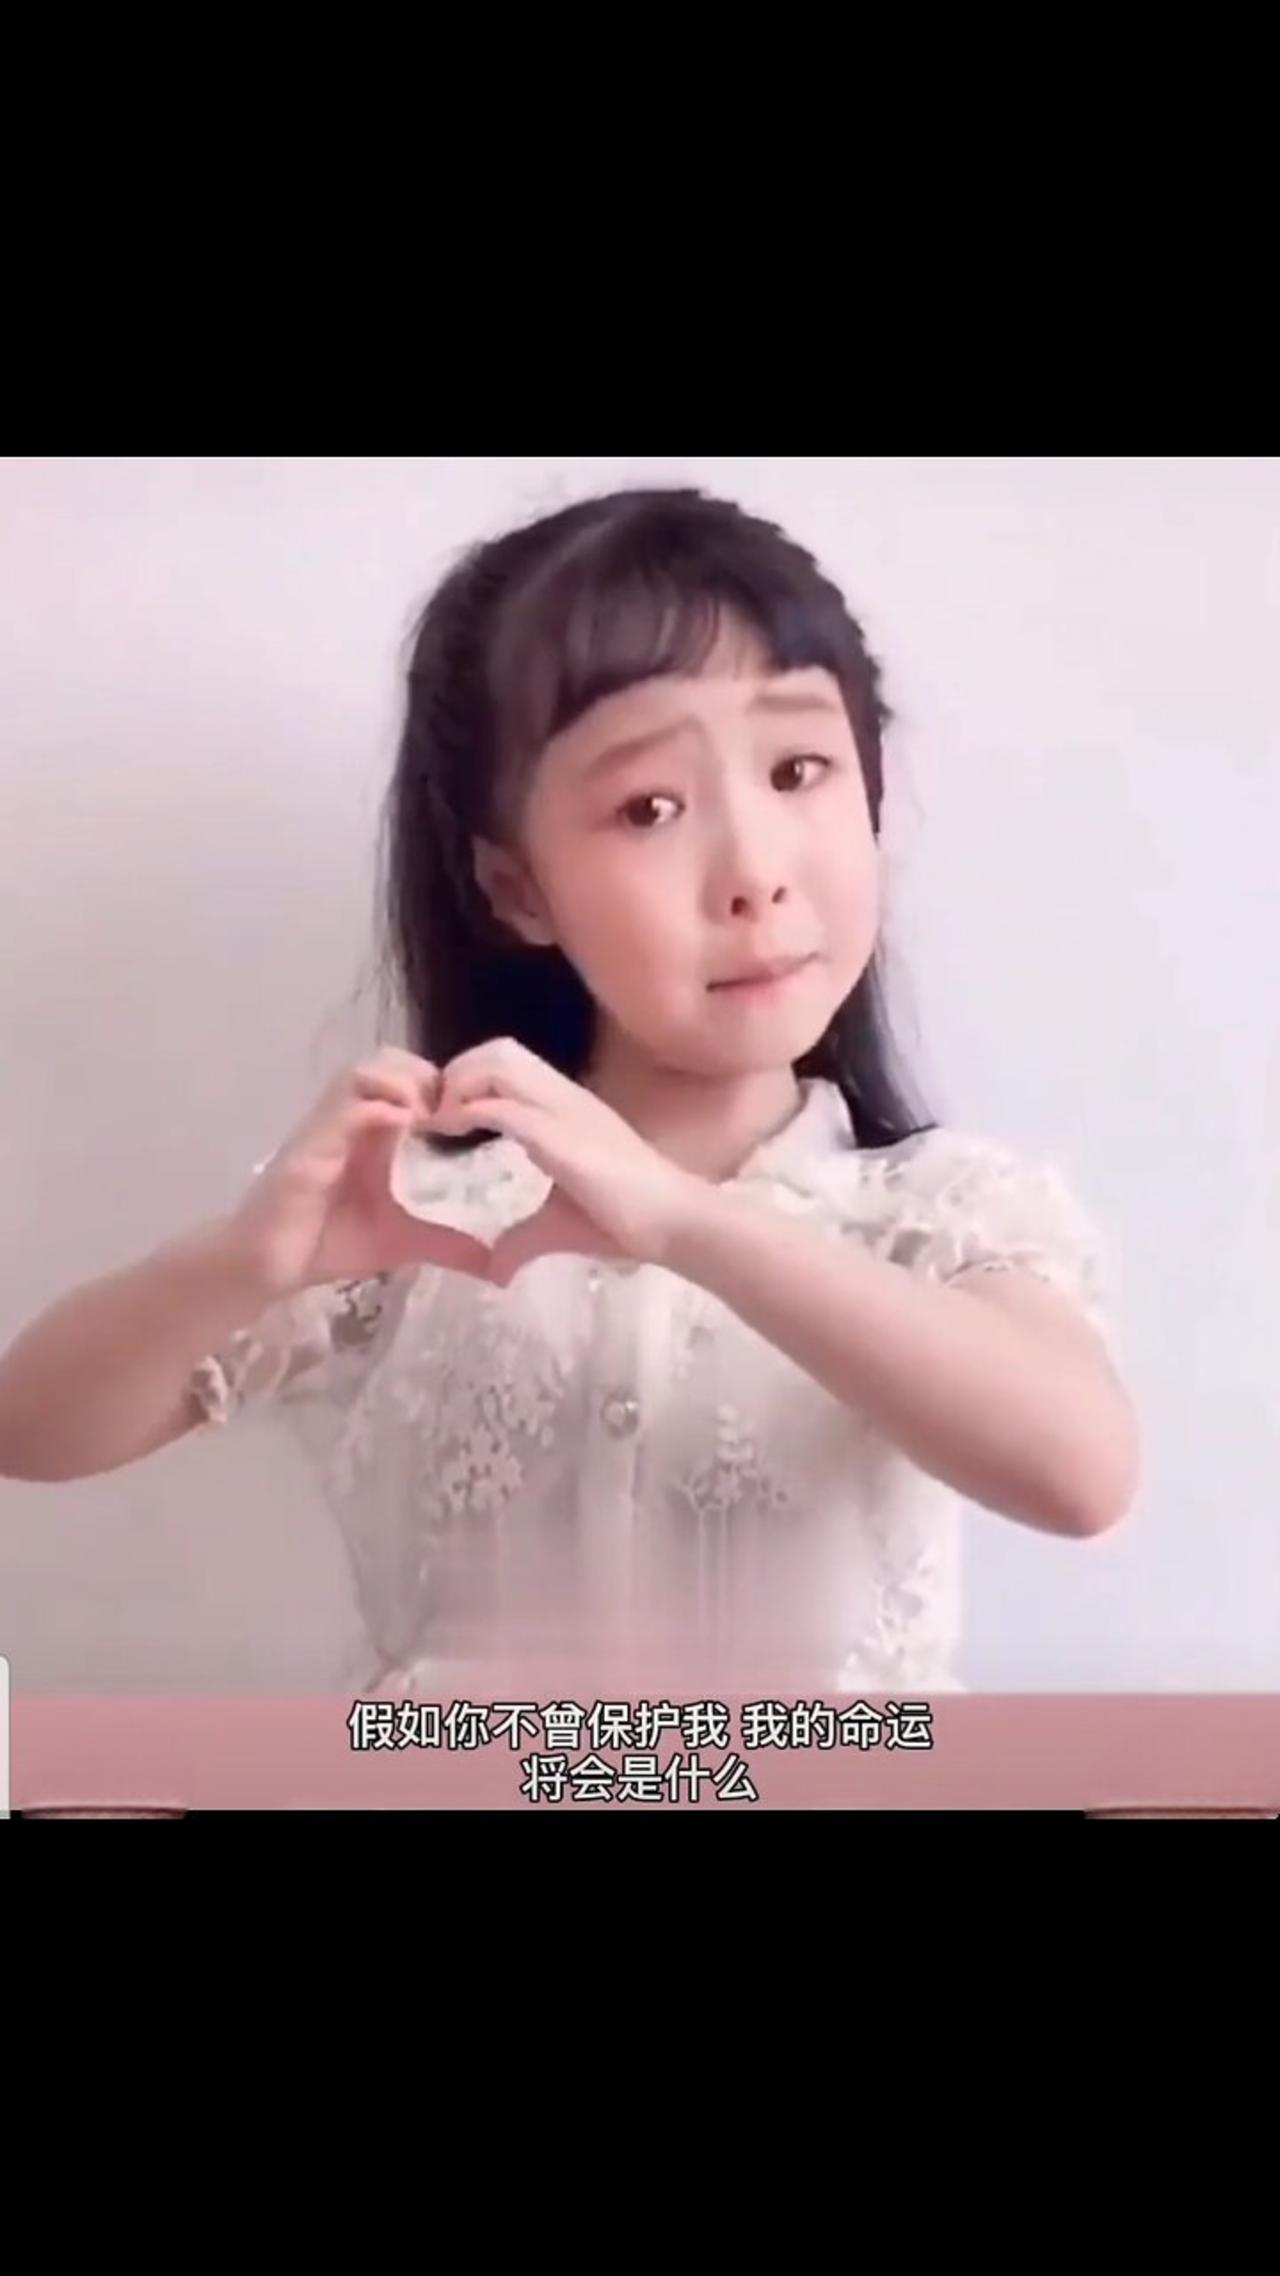 Most touching sign language version cover of "father's love"! tears